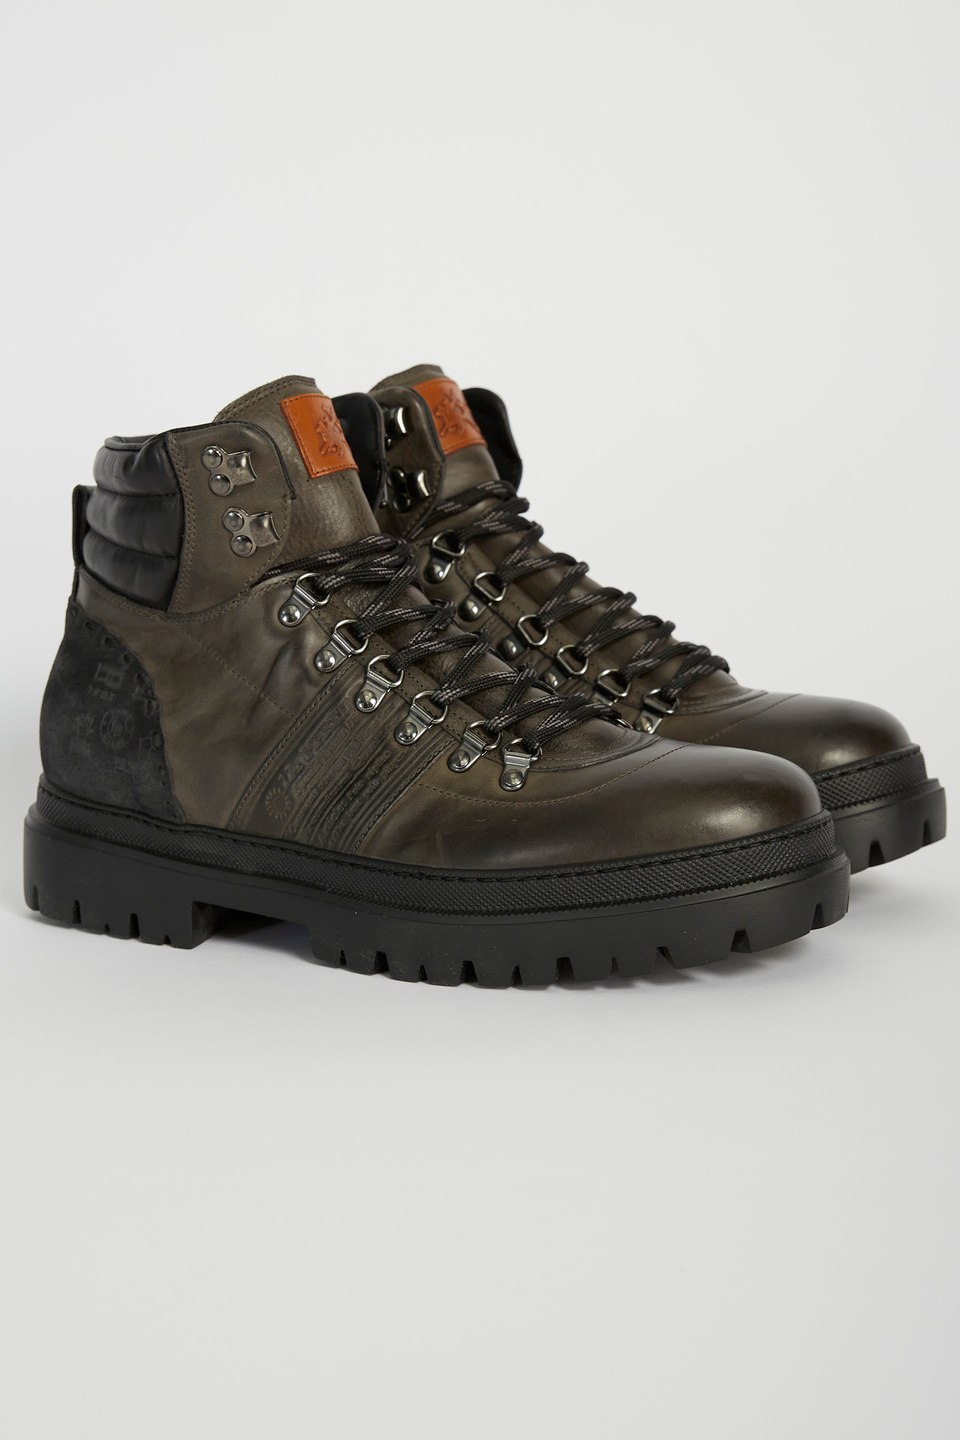 Combat boot in mixed leather | La Martina - Official Online Shop